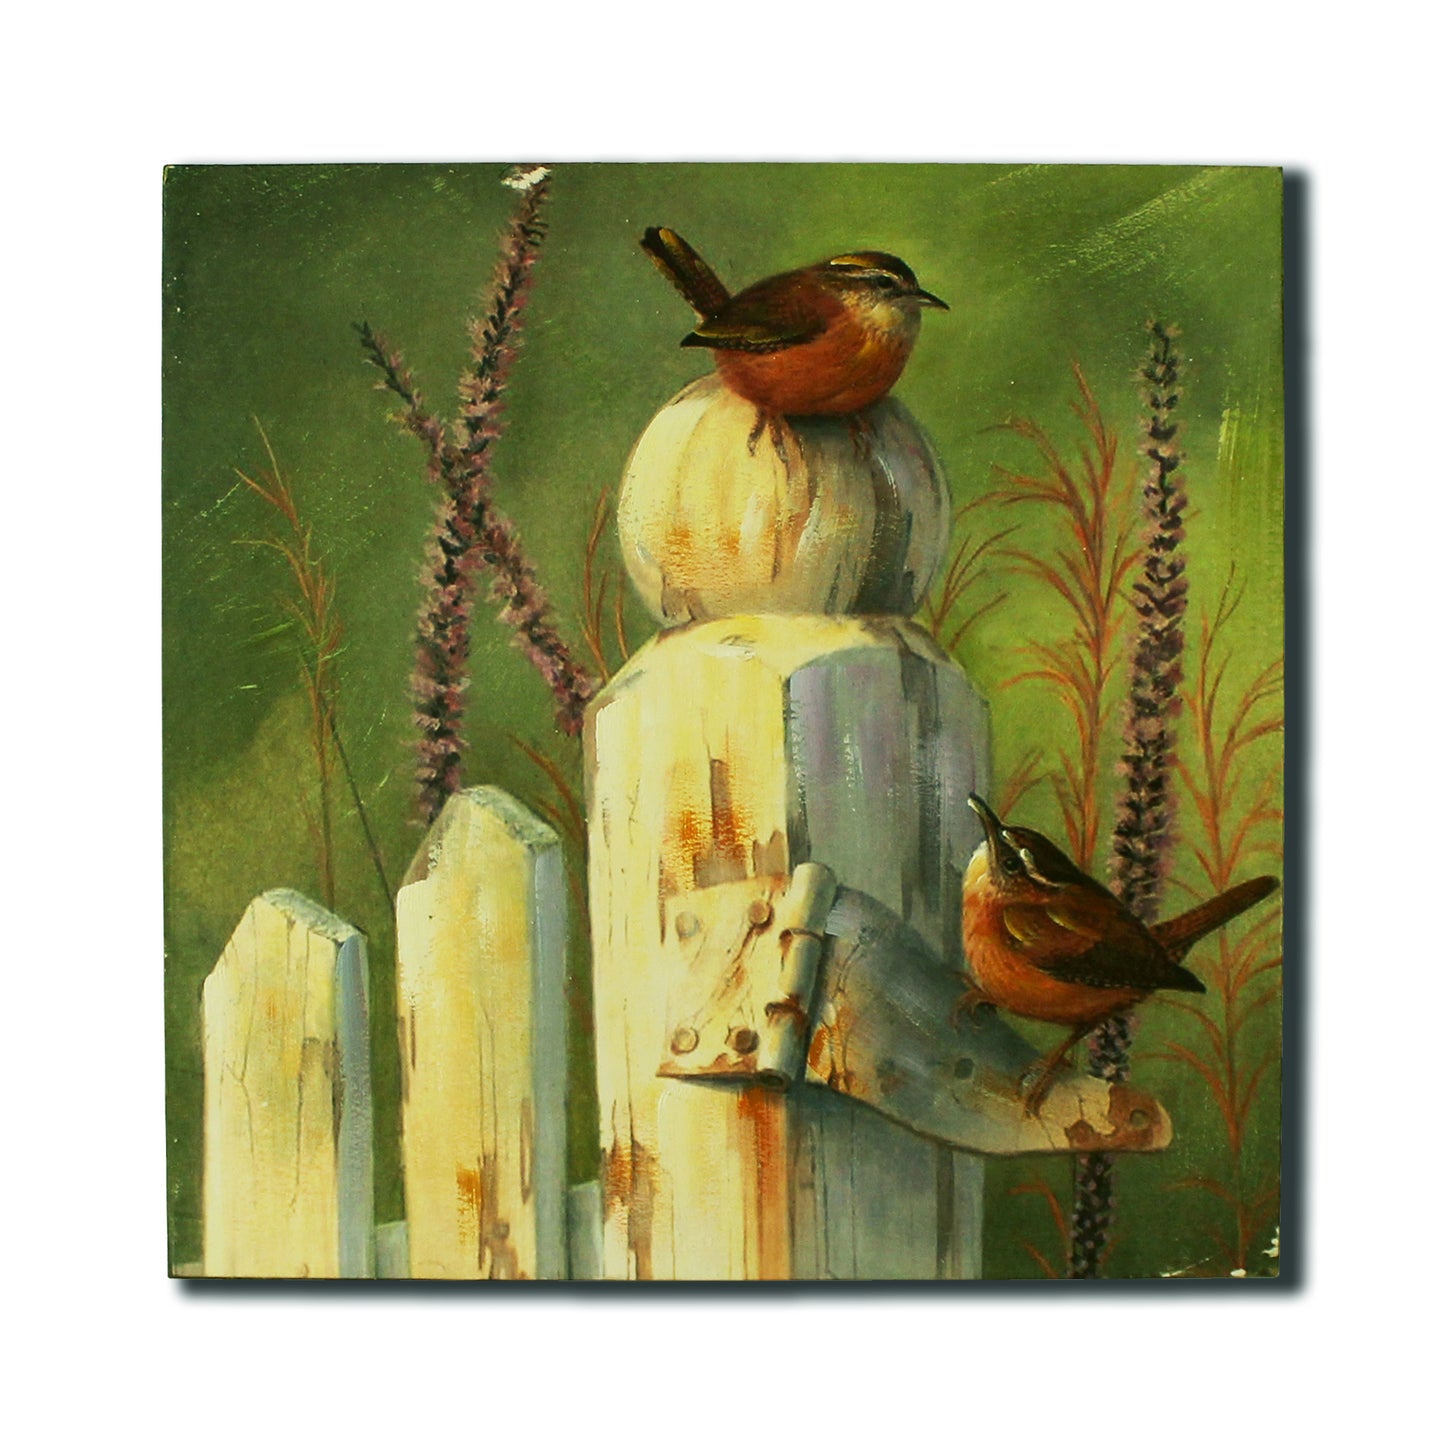 CVHOMEDECO. Primitives Rustic Hand Painted Wooden Frame Wall Hanging 3D Painting Decoration Art, Birds in Barrier Design, 15 x 15 Inch